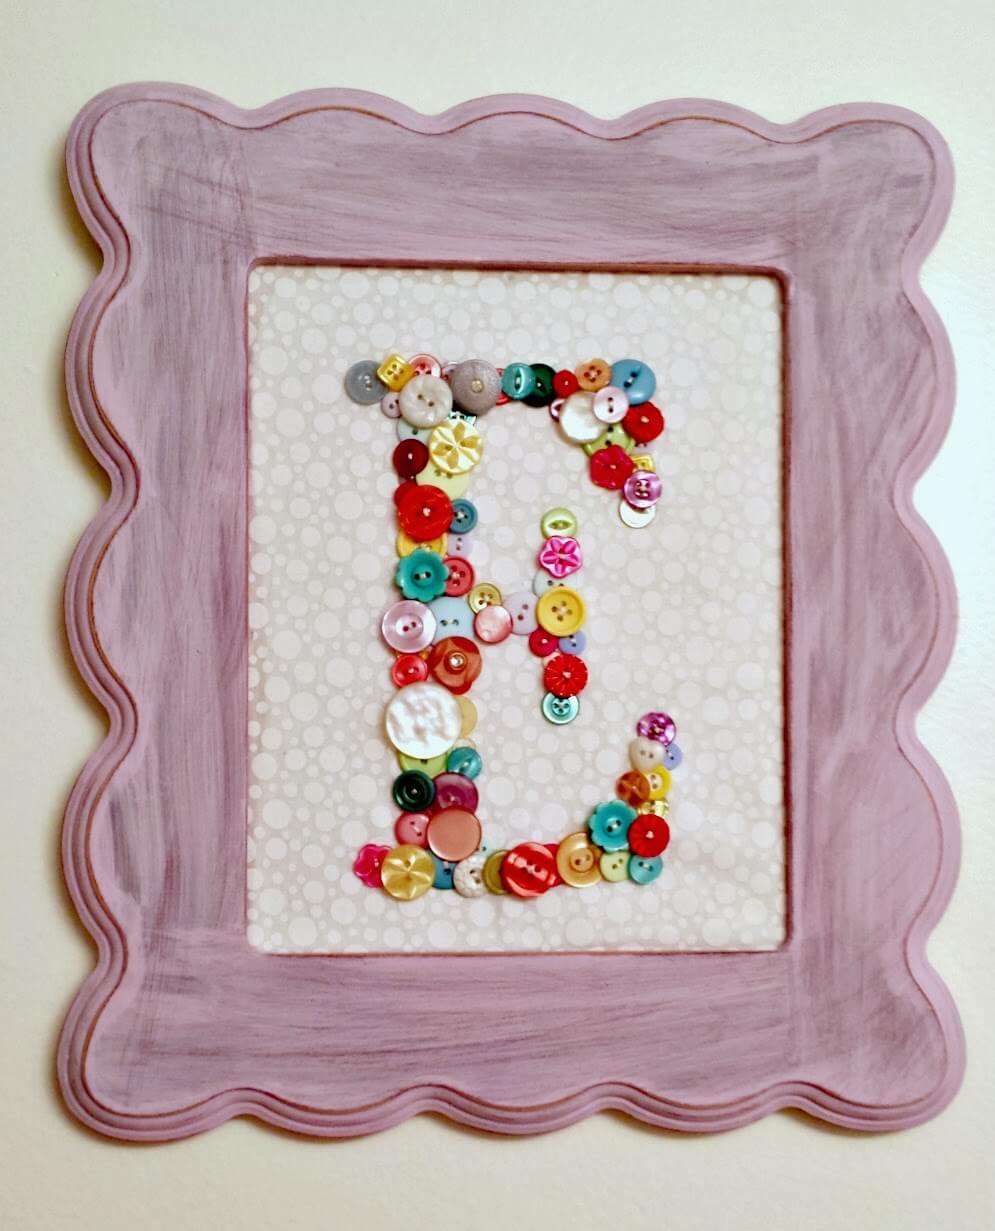 B is For Button Monogram Craft Tutorial Using Felt, Embroidery Hoop, & Stencil - Innovative Wall Decoration Ideas with Buttons